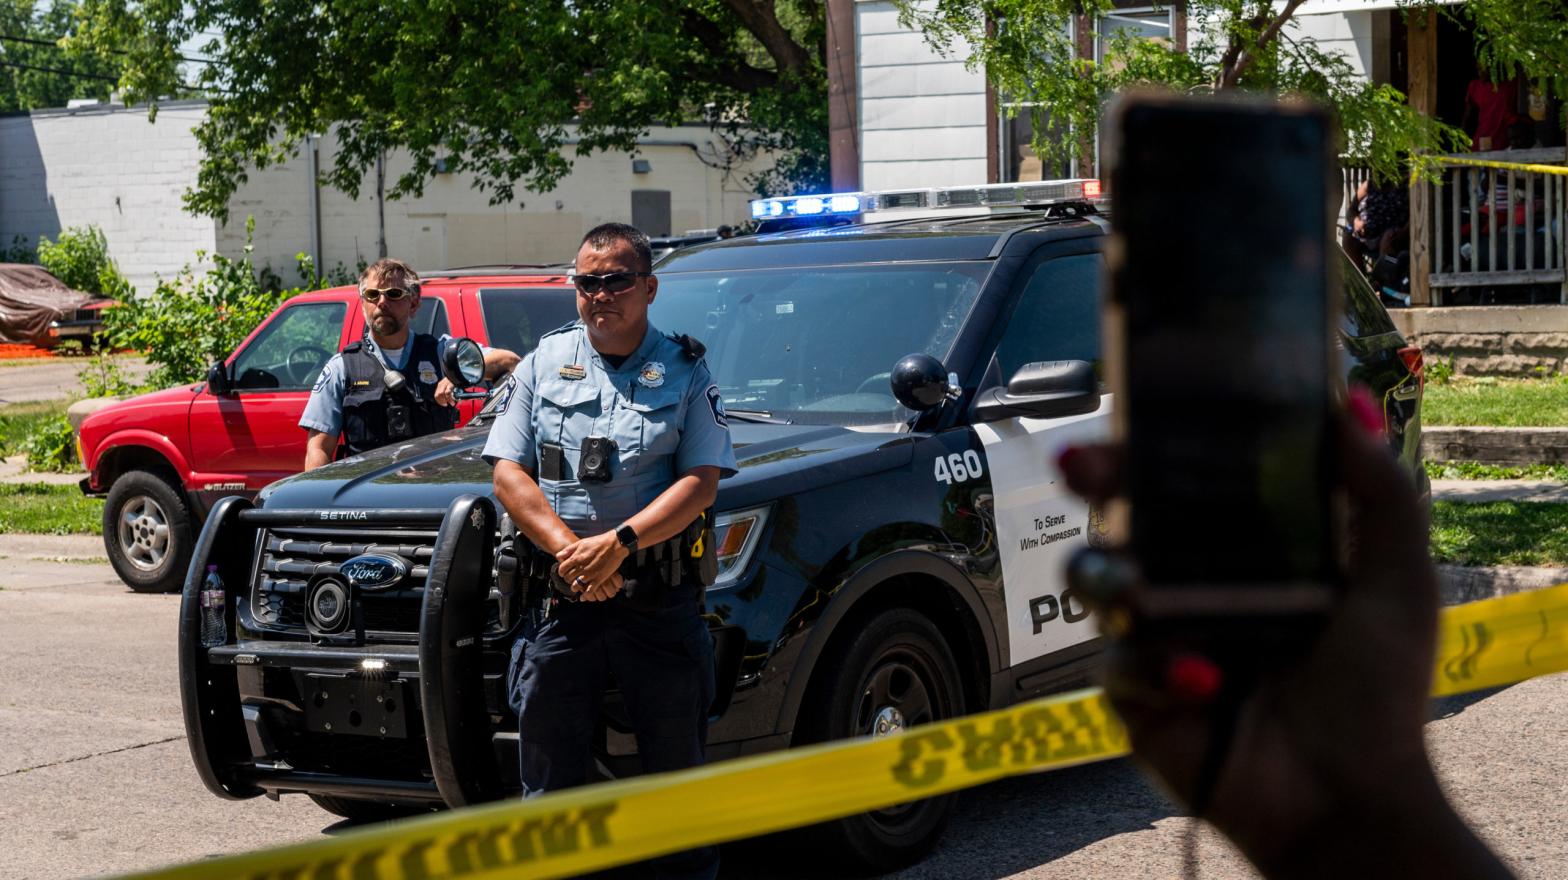 MINNEAPOLIS, MN - JUNE 16: A woman holds up her phone as Minneapolis Police officers respond at a crime scene on June 16, 2020 in Minneapolis, Minnesota. The Minneapolis Police Department has been under increased scrutiny by residents and elected officials after the death of George Floyd in police custody on May 25. (Photo: Stephen Maturen, Getty Images)